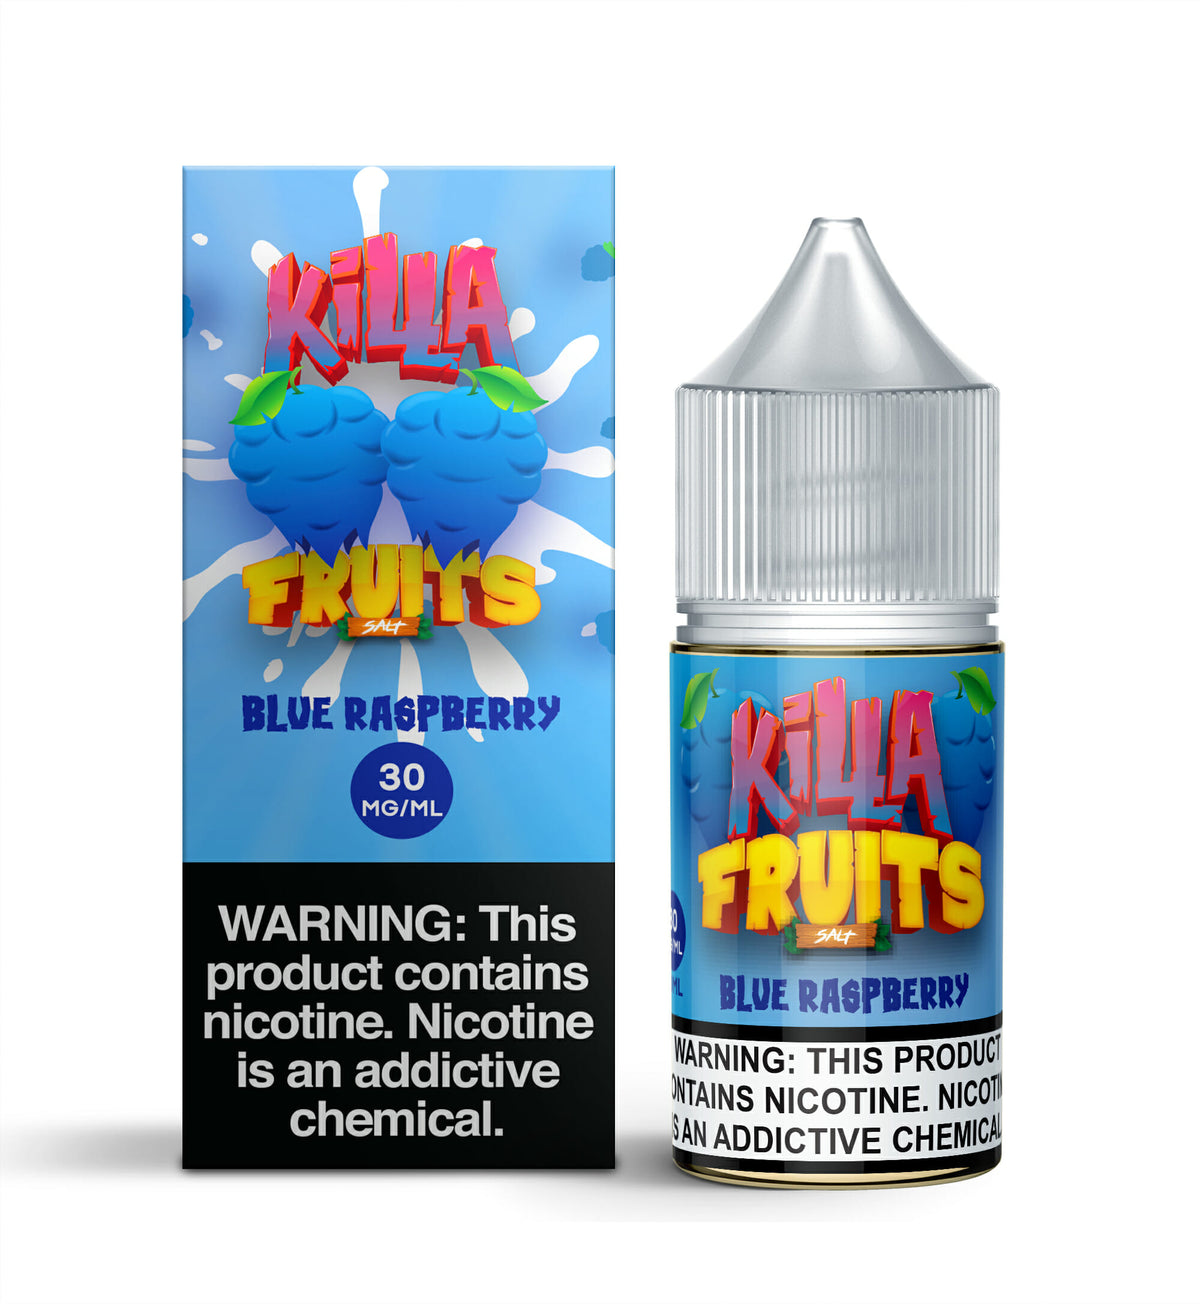 Blue Raspberry by Killa Fruits Salts Series 30mL with Packaging